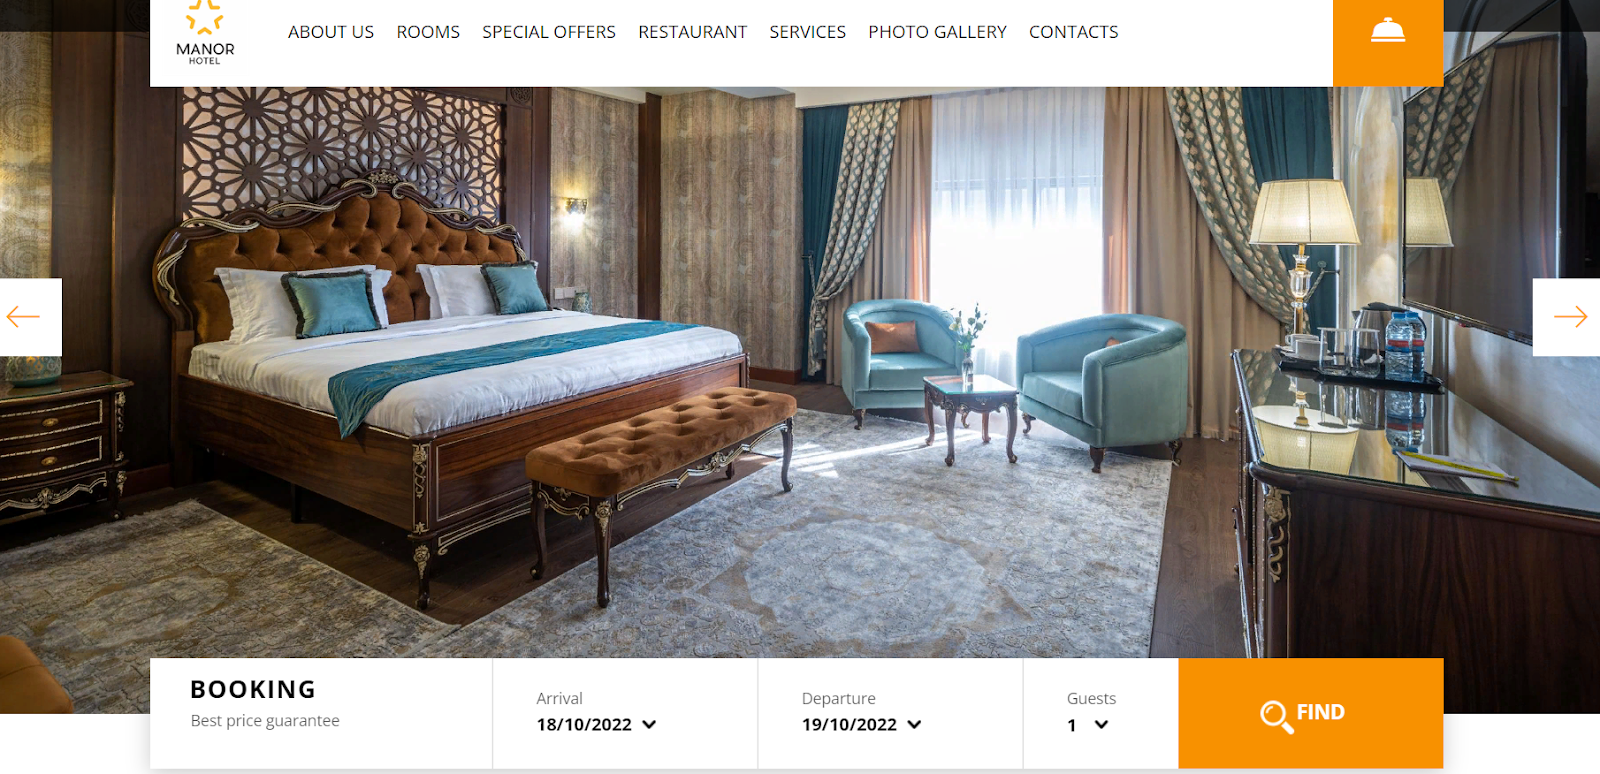 Booking Engine on the website of the Manor hotel in Tashkent